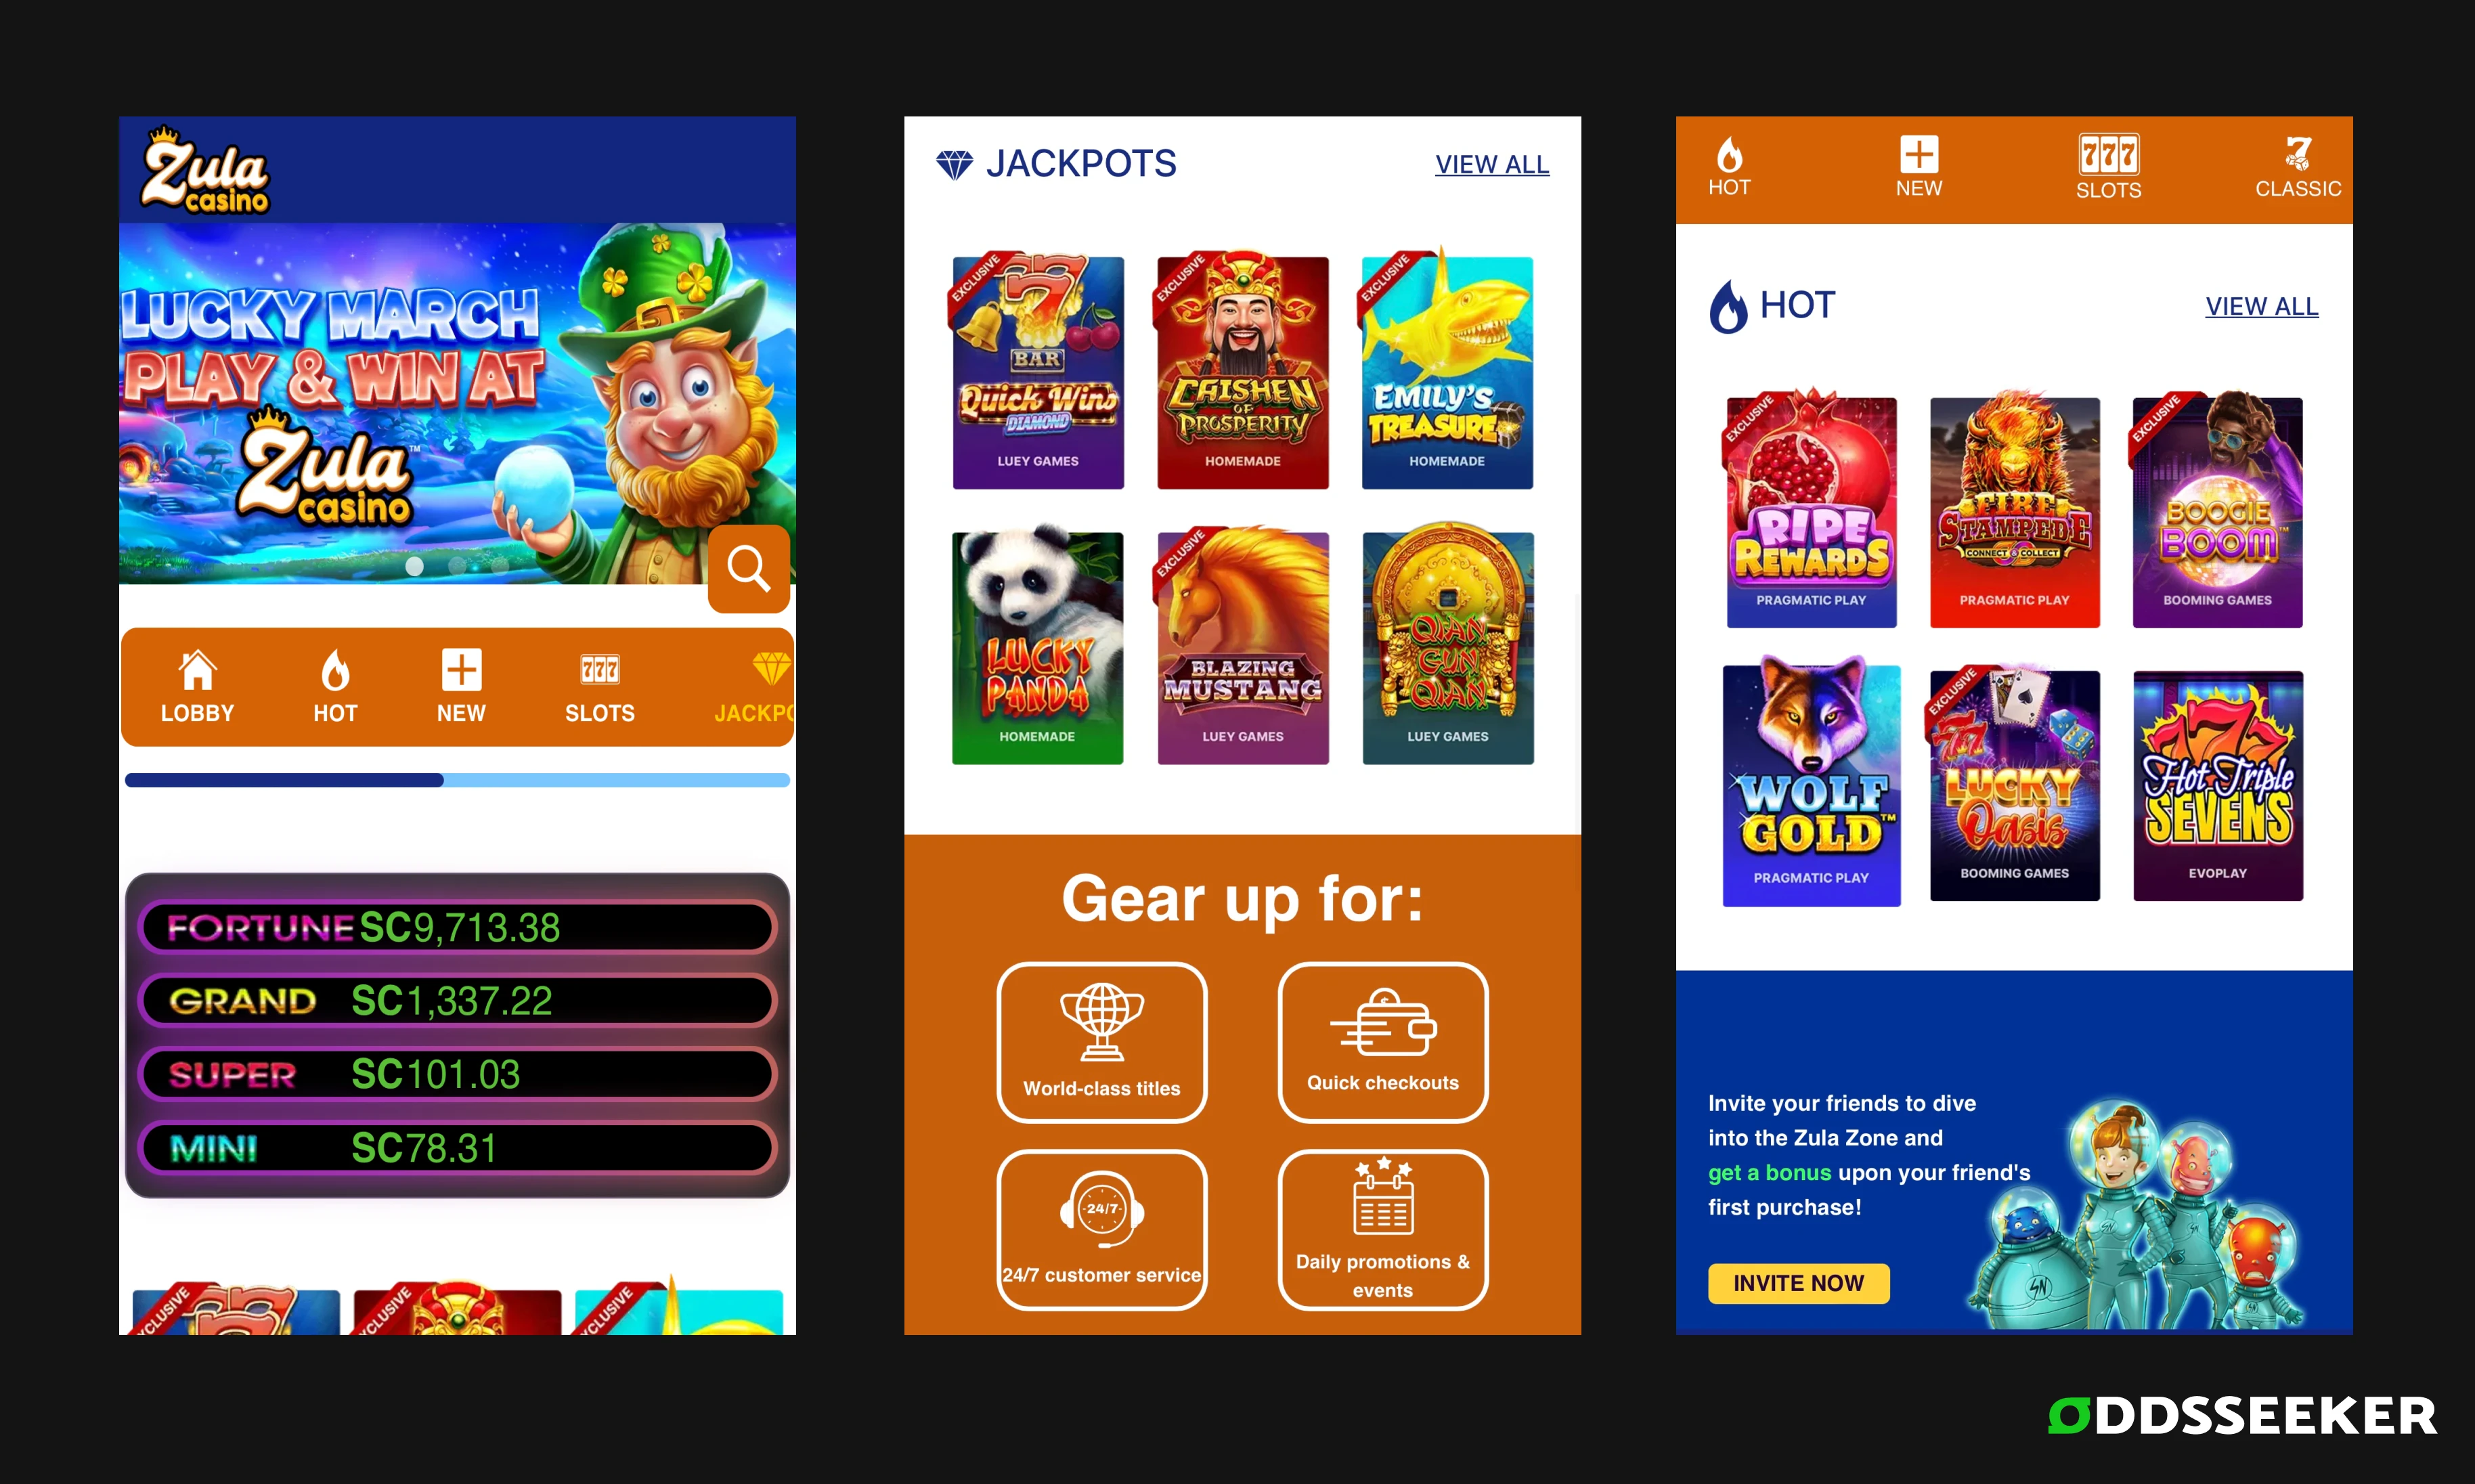 Gallery of Product Screenshots From Zula Casino - Games and Login